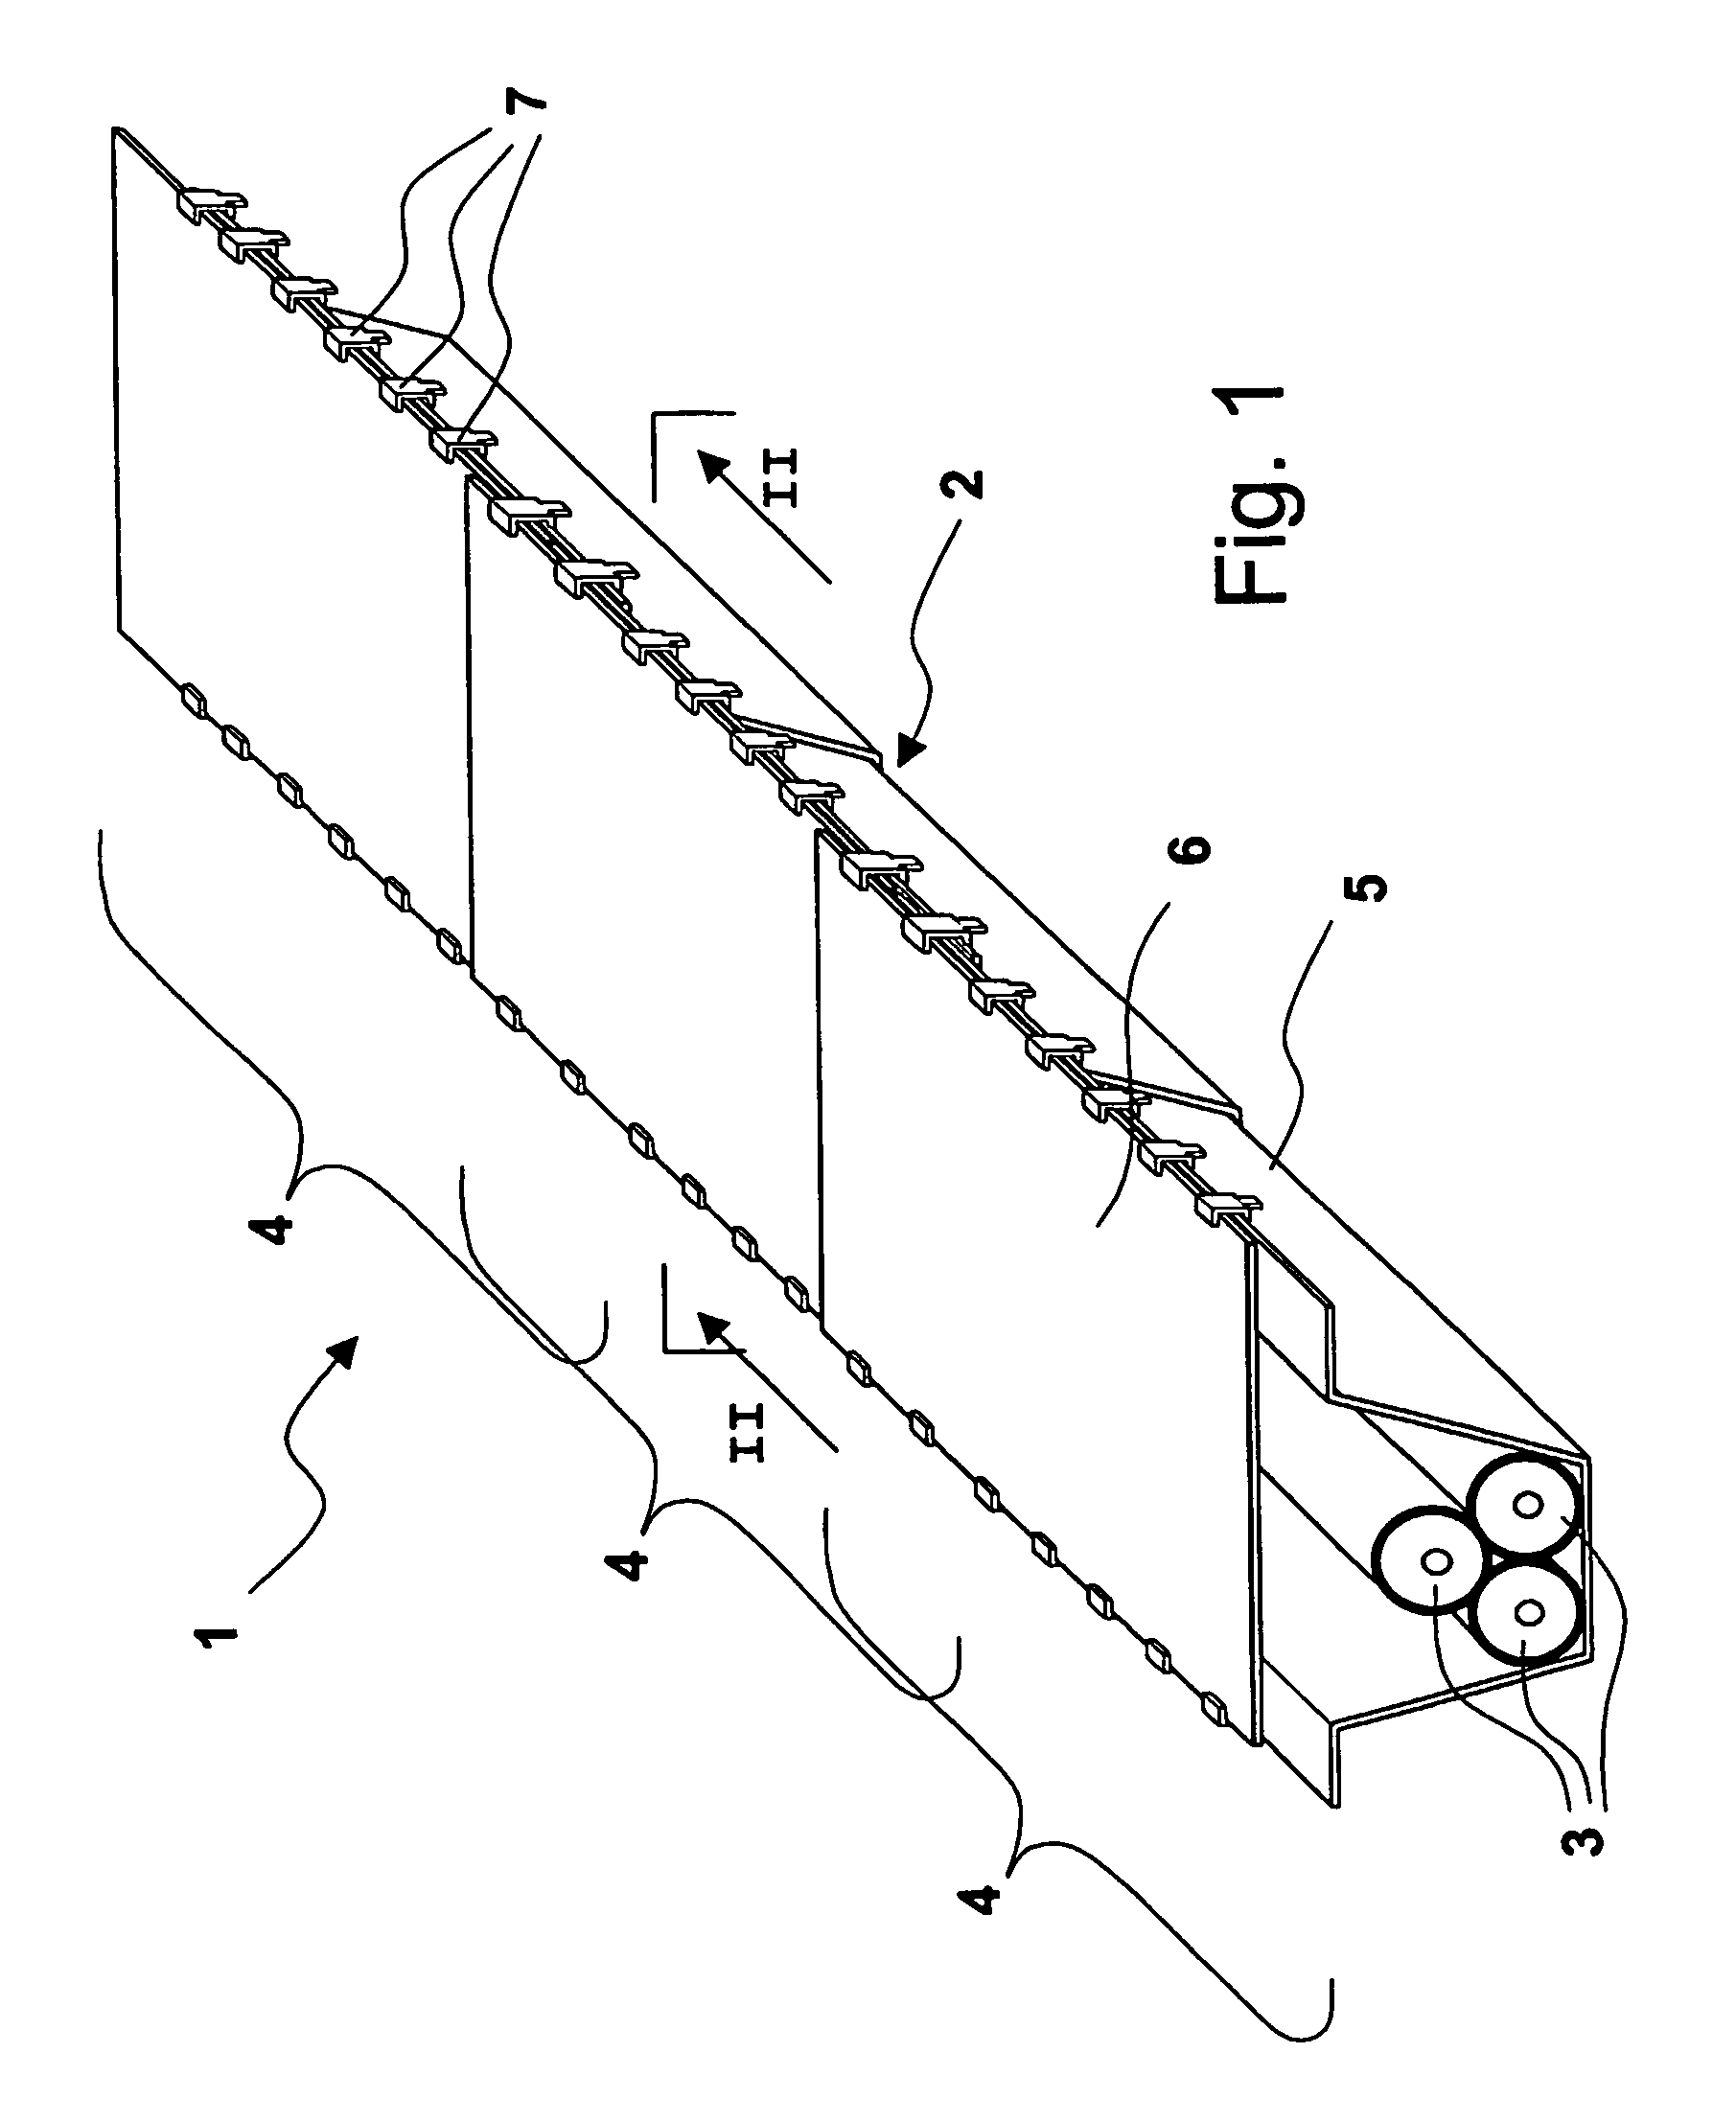 Method of screening the magnetic field generated by an electrical power transmission line and electrical power transmission line so screened